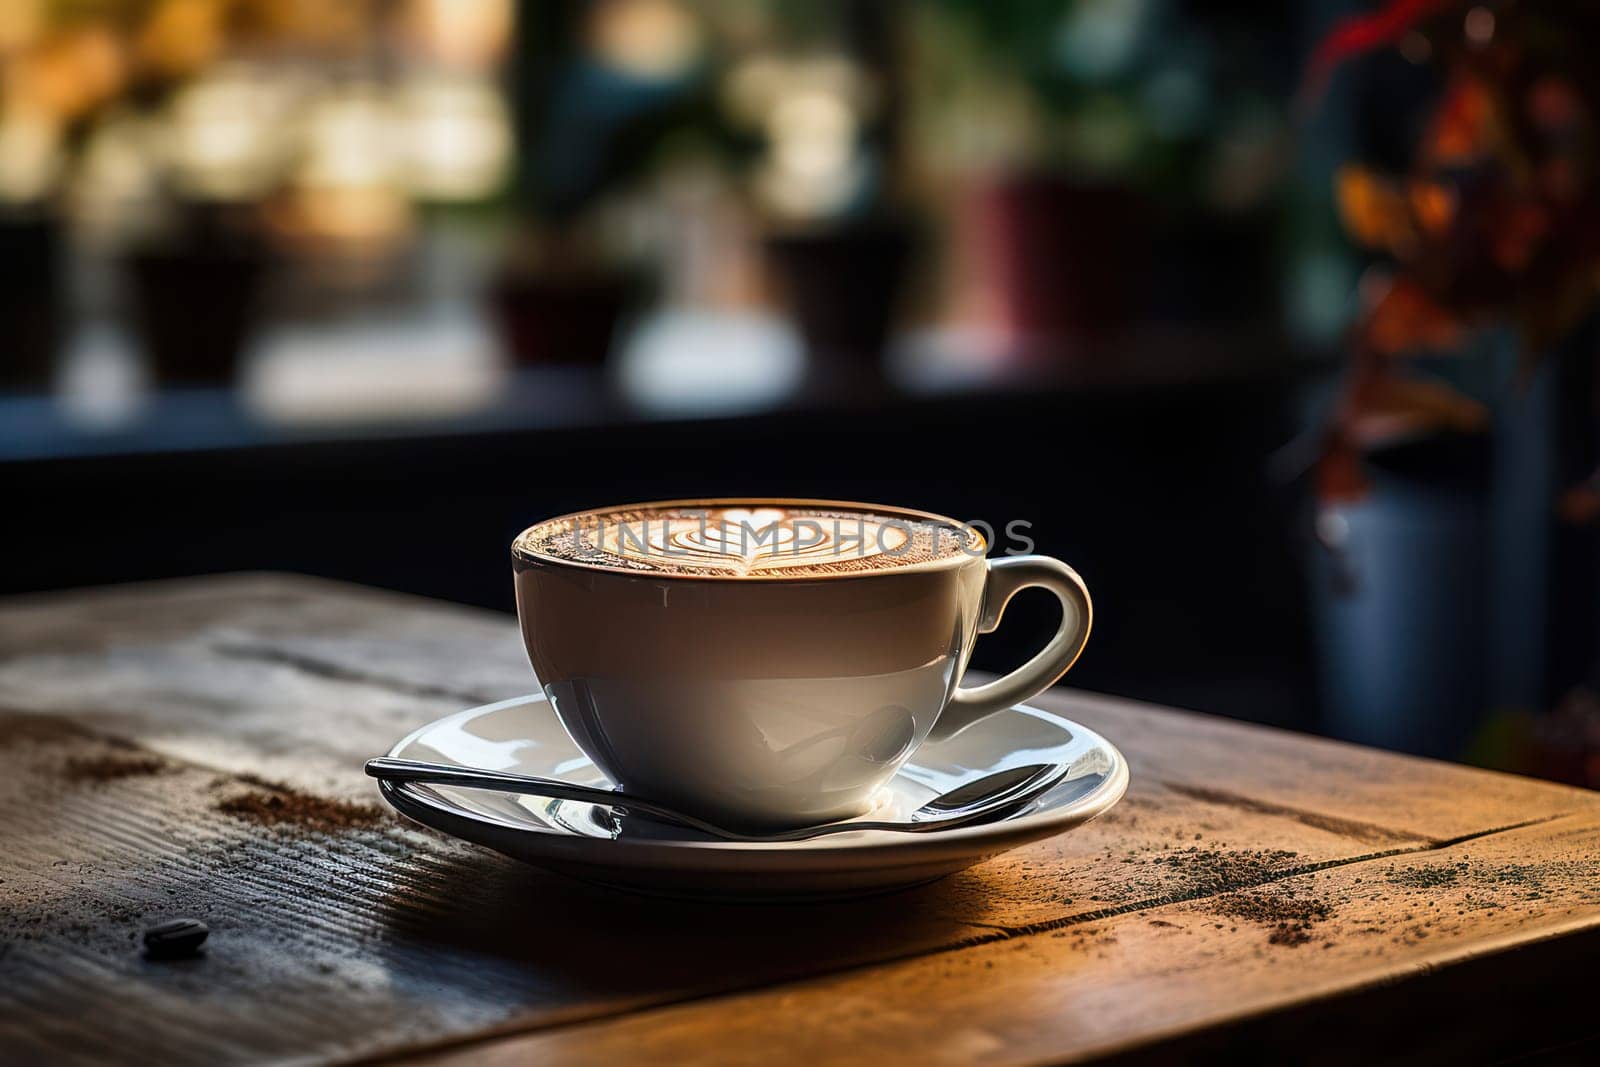 Morning Cappuccino: A Delicious Cup of Caffeine Indulgence on a Wooden Table, with White Foam and a Hint of Aroma, Set against a Vintage Black Background